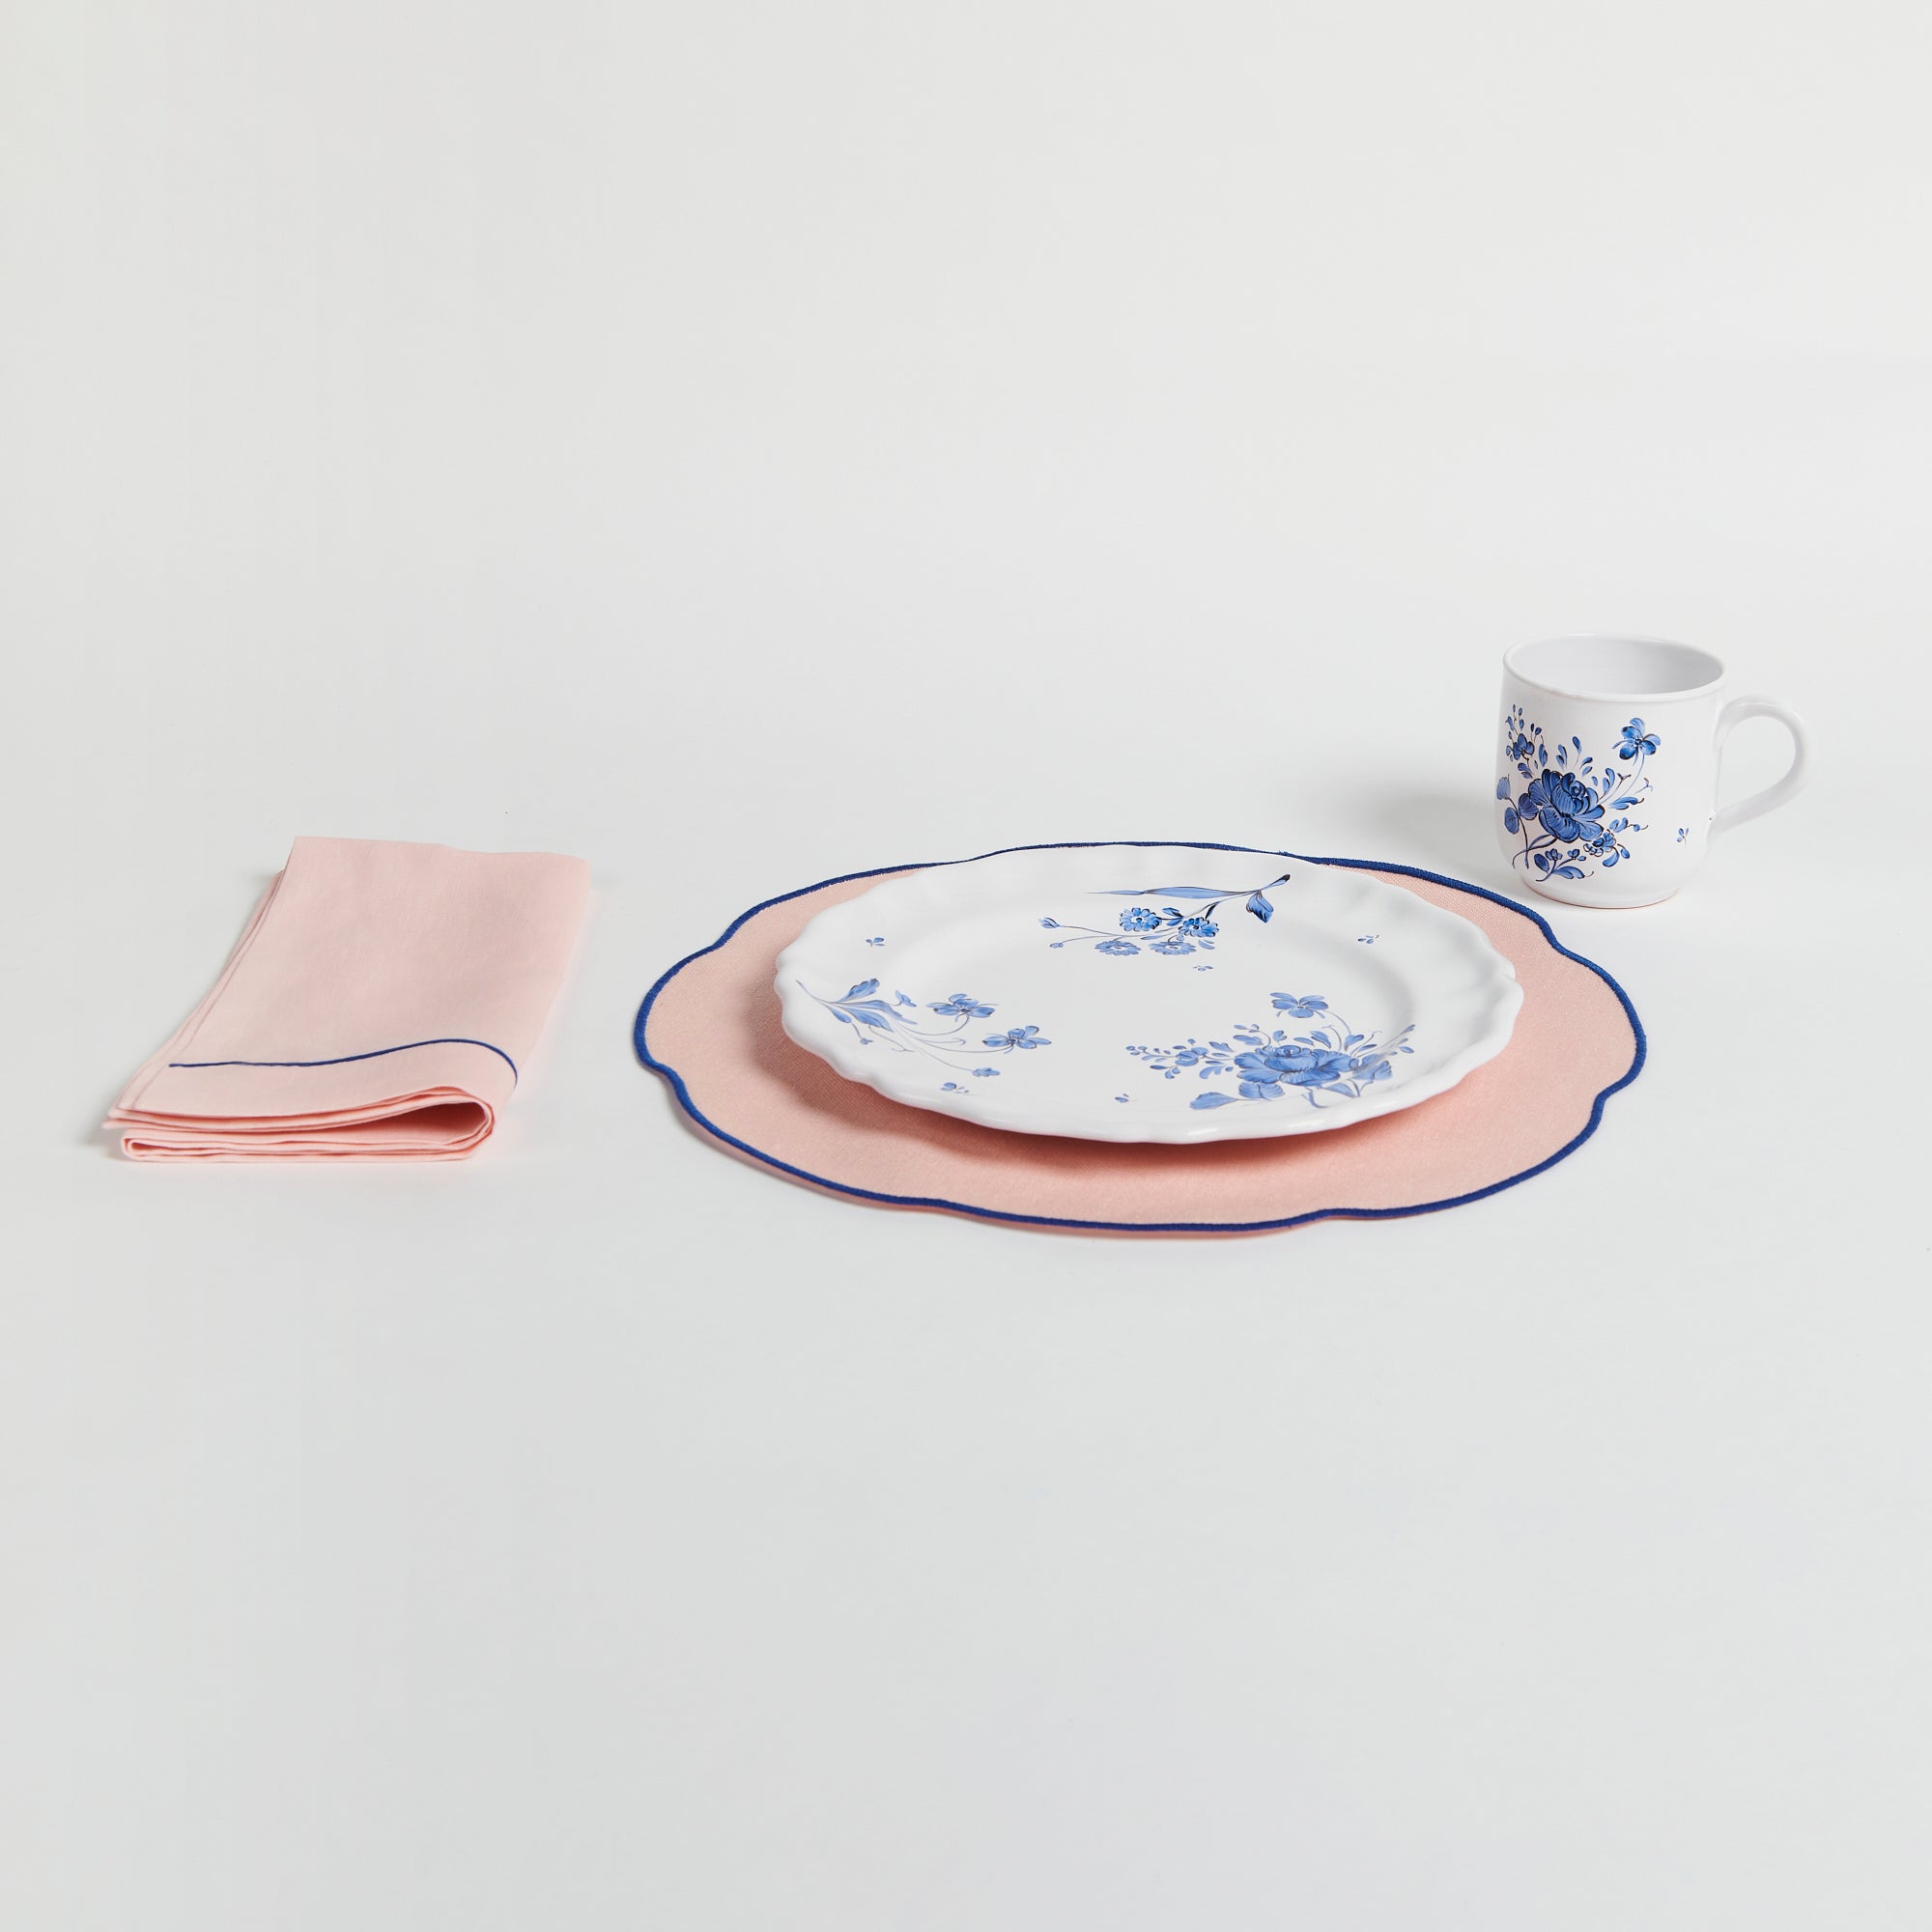 table setting with Coated Pink Linen Placemat, Blue